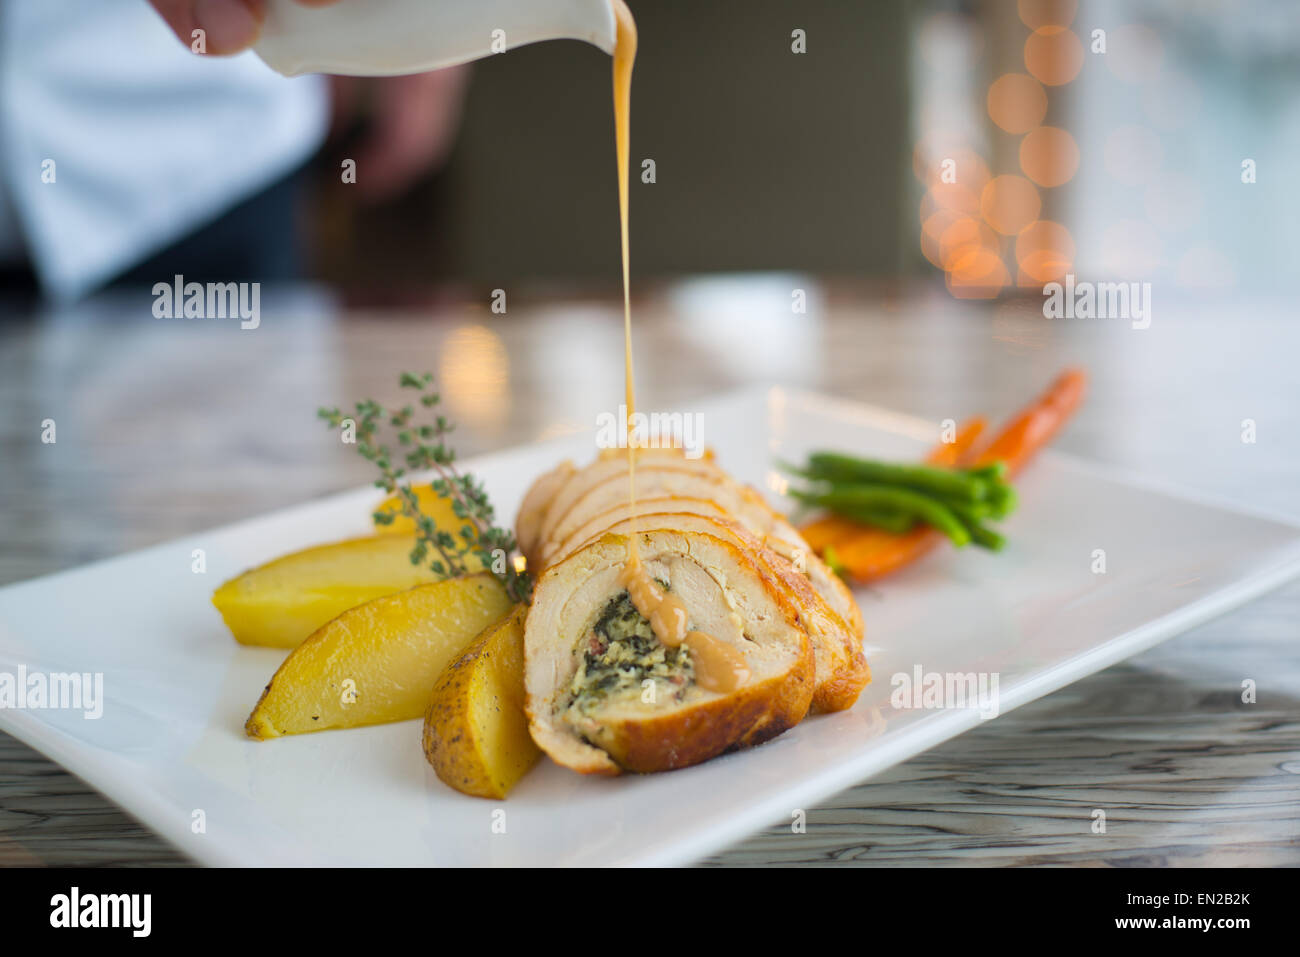 Chicken roulade with sauce drizzled over on white plate with herbs, potato wedges, and vegetables Stock Photo